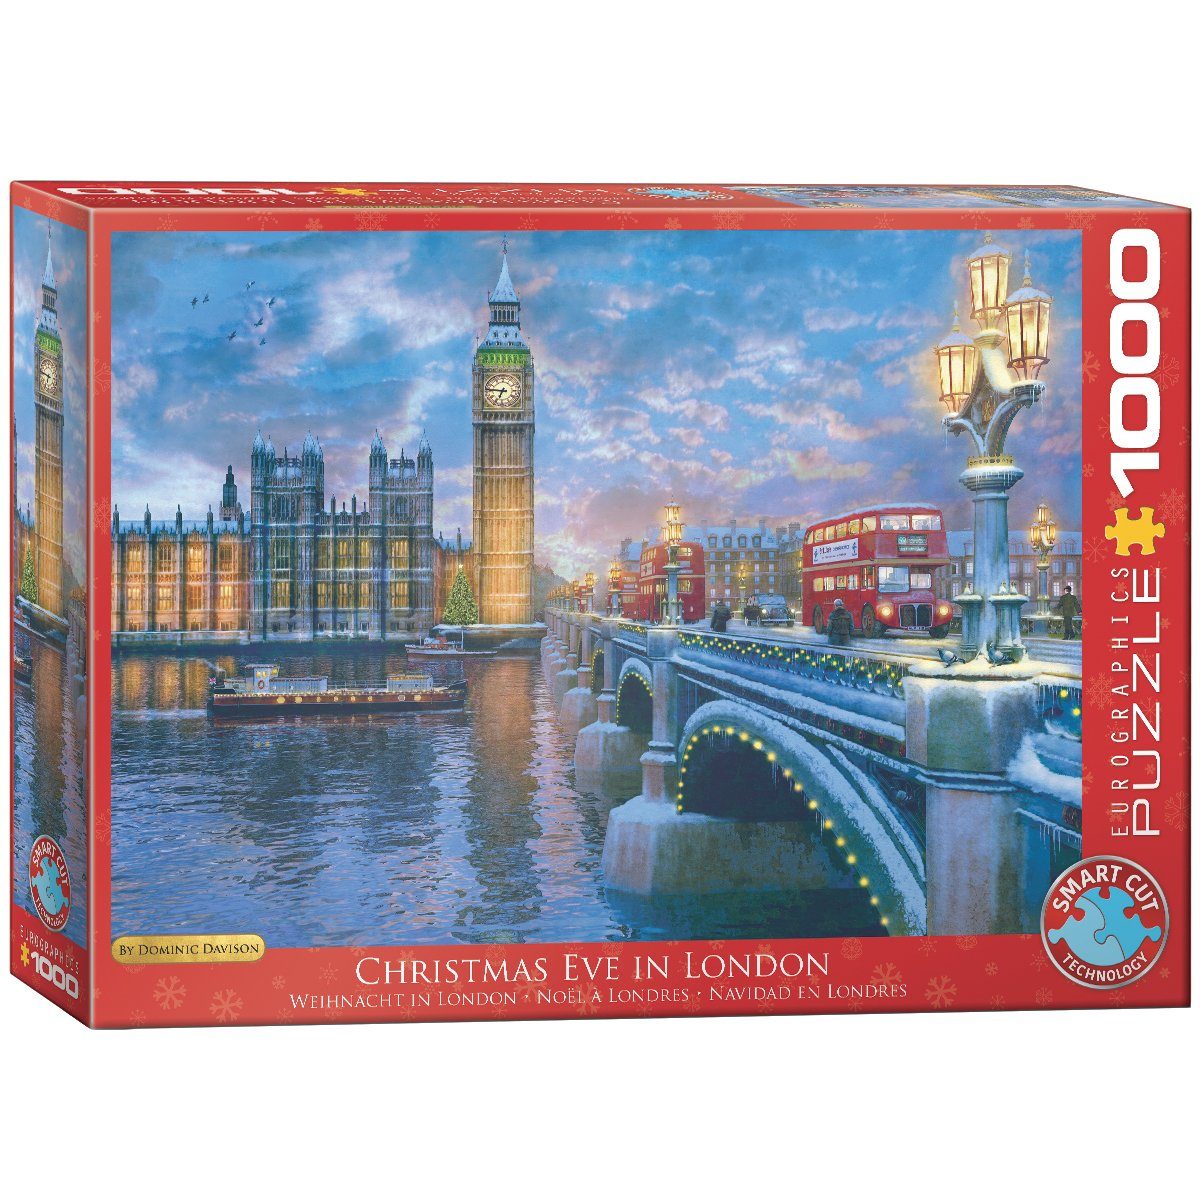 EUROGRAPHICS Puzzle Dominic Davison Weihnacht in London Puzzle, 1000 Puzzleteile, Made in Europe